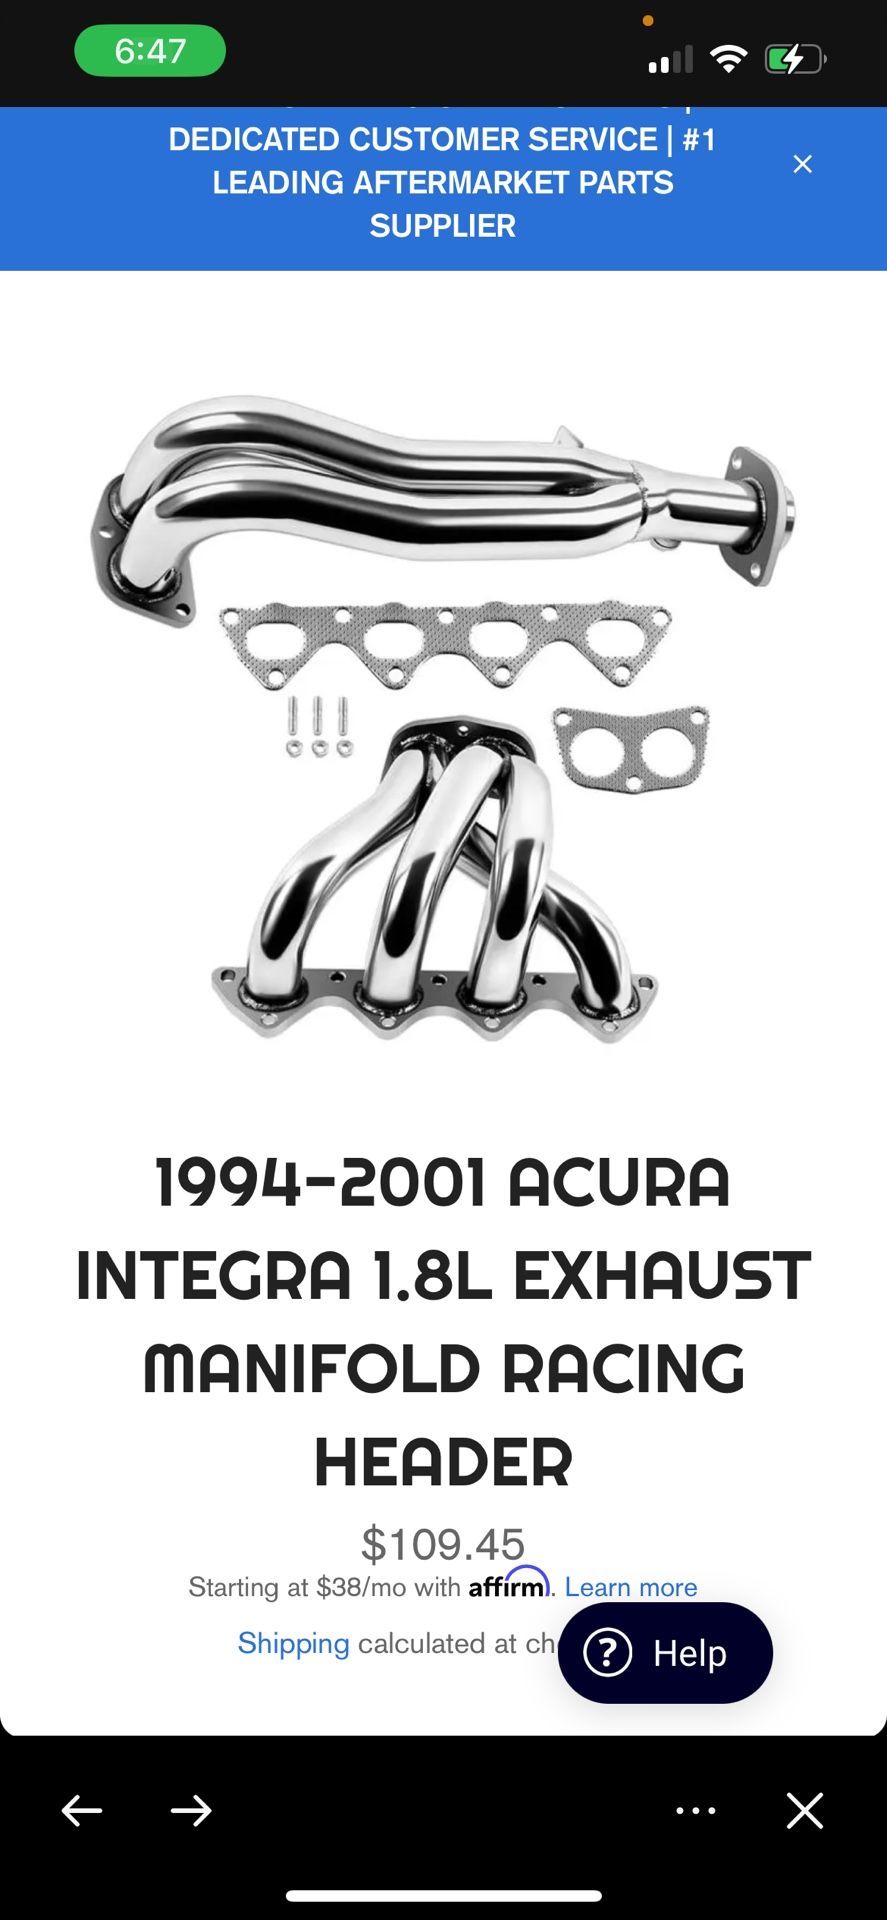 Dynamic Performance tuning 1(contact info removed) Acura Integra 1.8L Exhaust Manifold Racing Headers